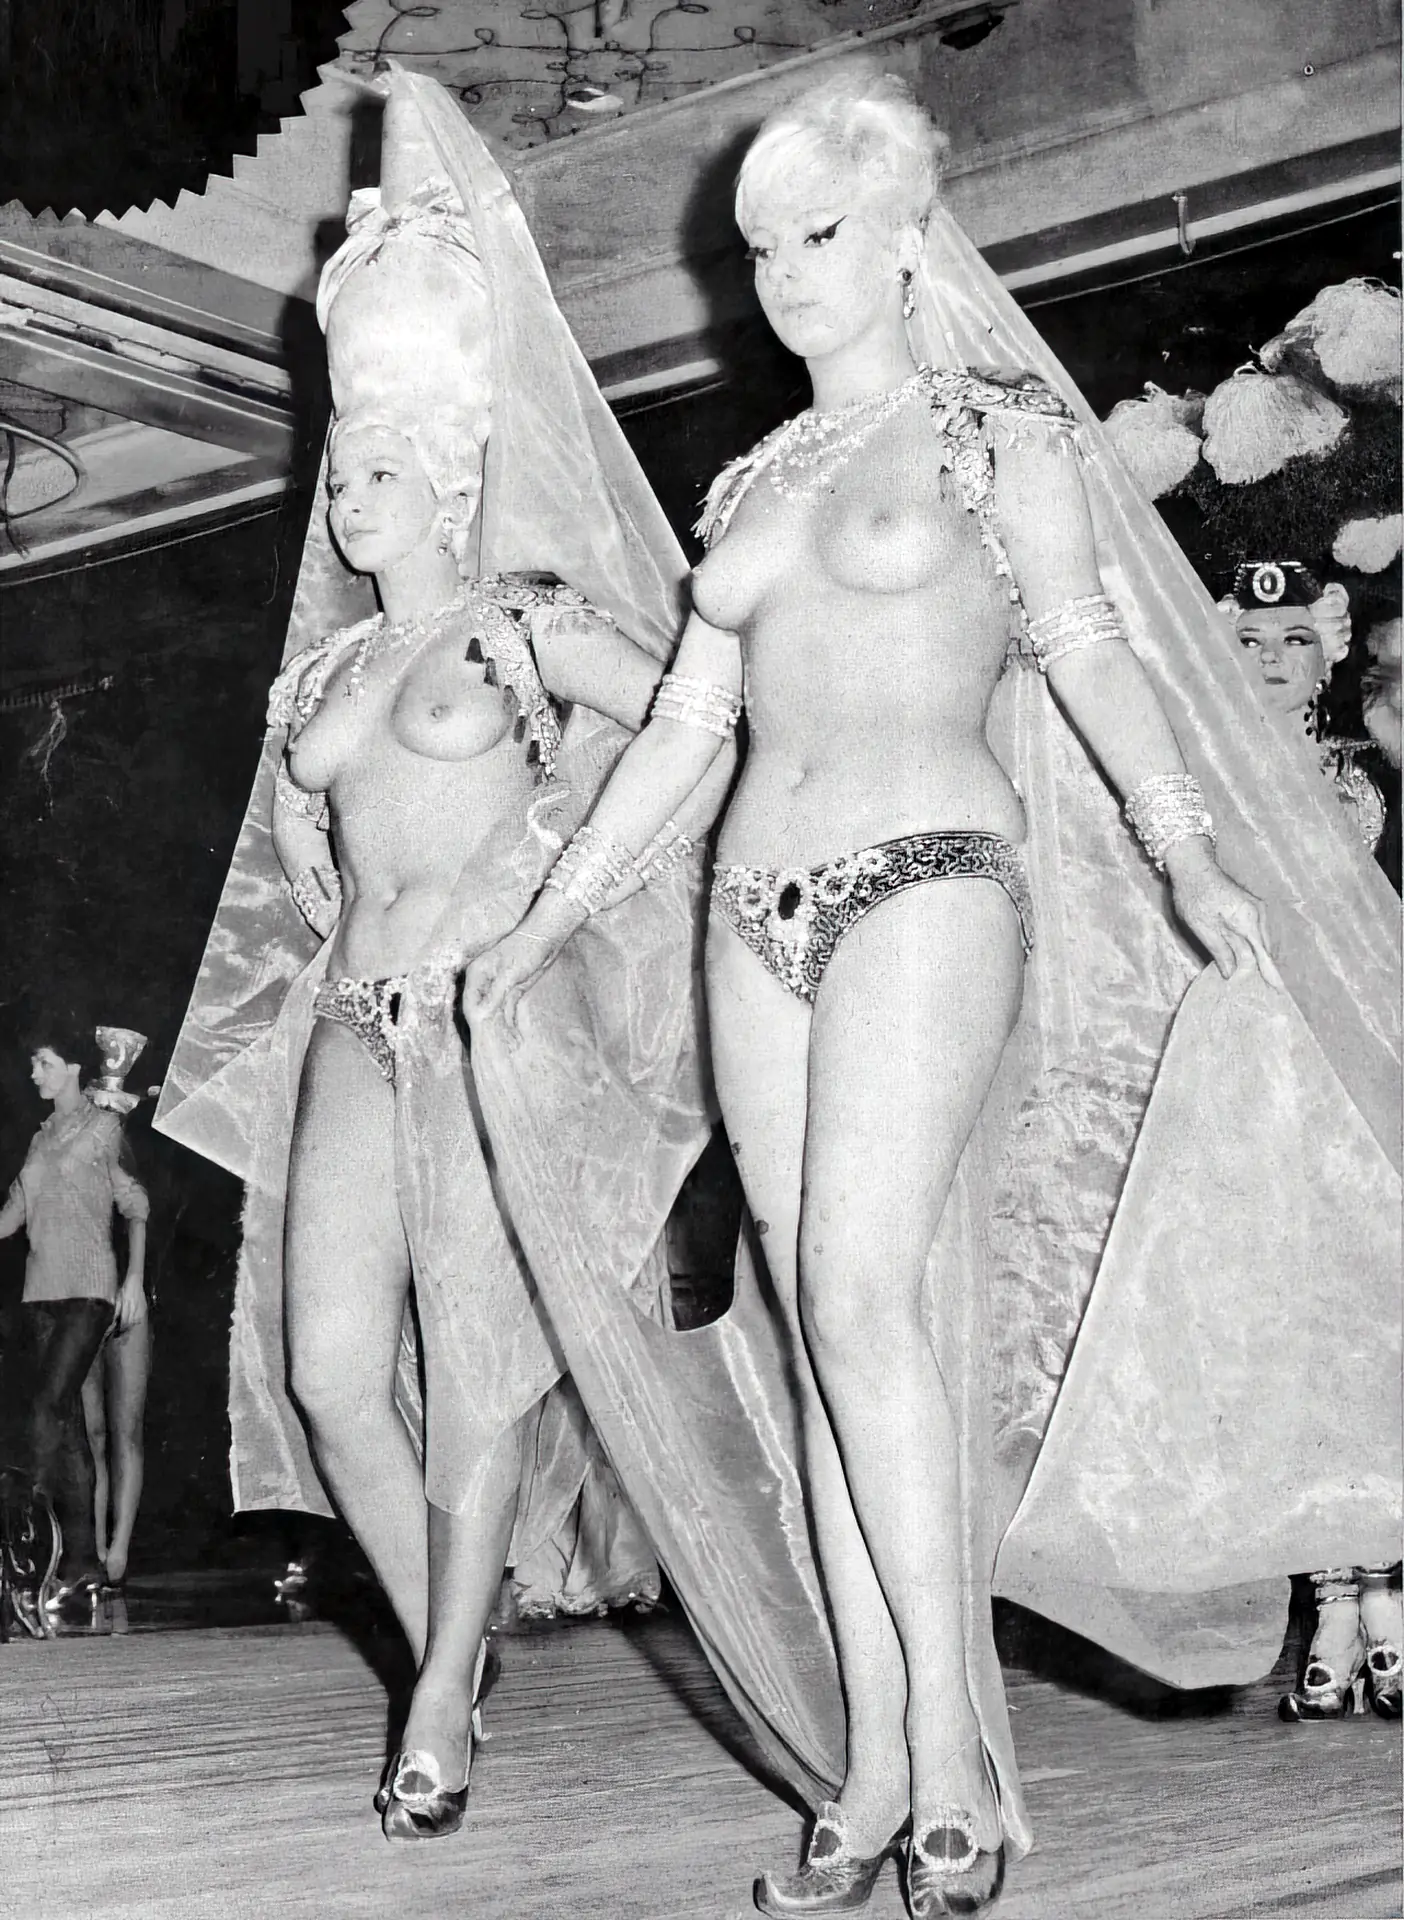 Vintage high heels porn photo Extravagantly dressed topless vintage babes in a burlesque theatre